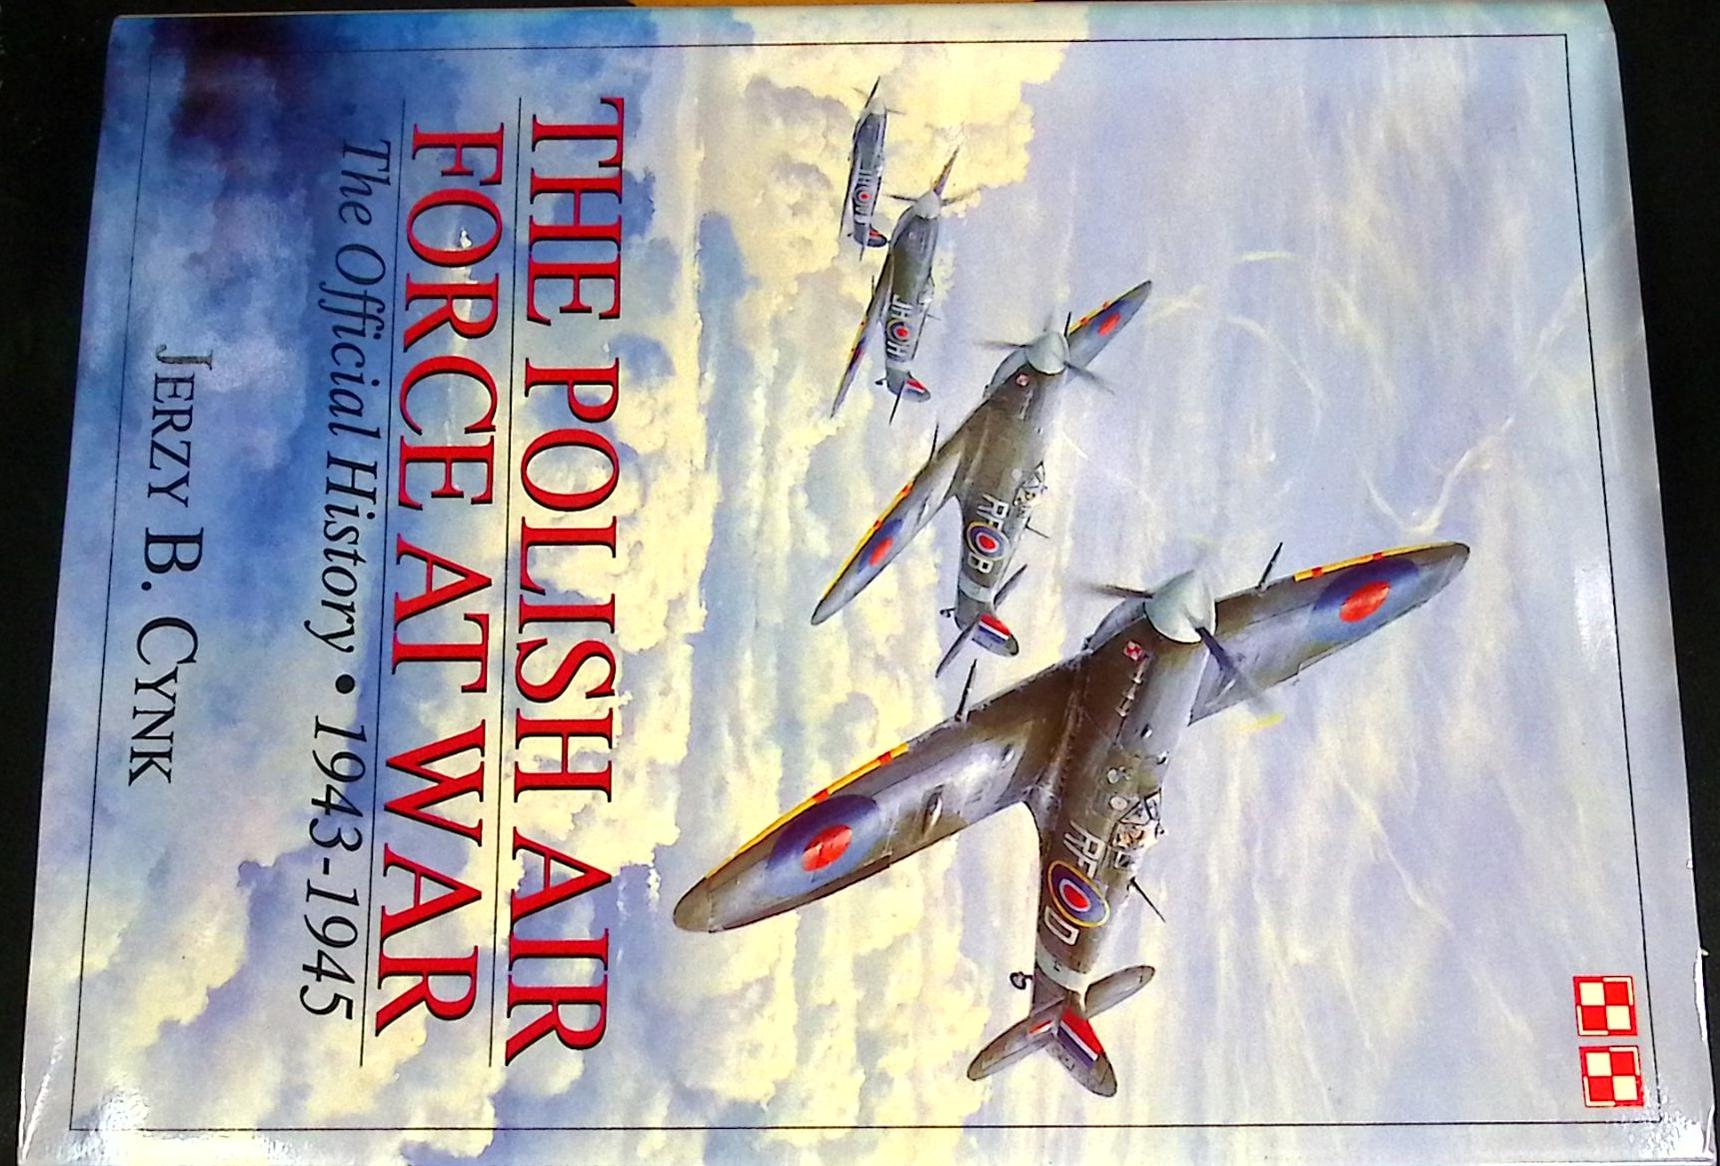 The Polish Air Force at War. The Official History  Volume 2 1943-1945. Signed copy.